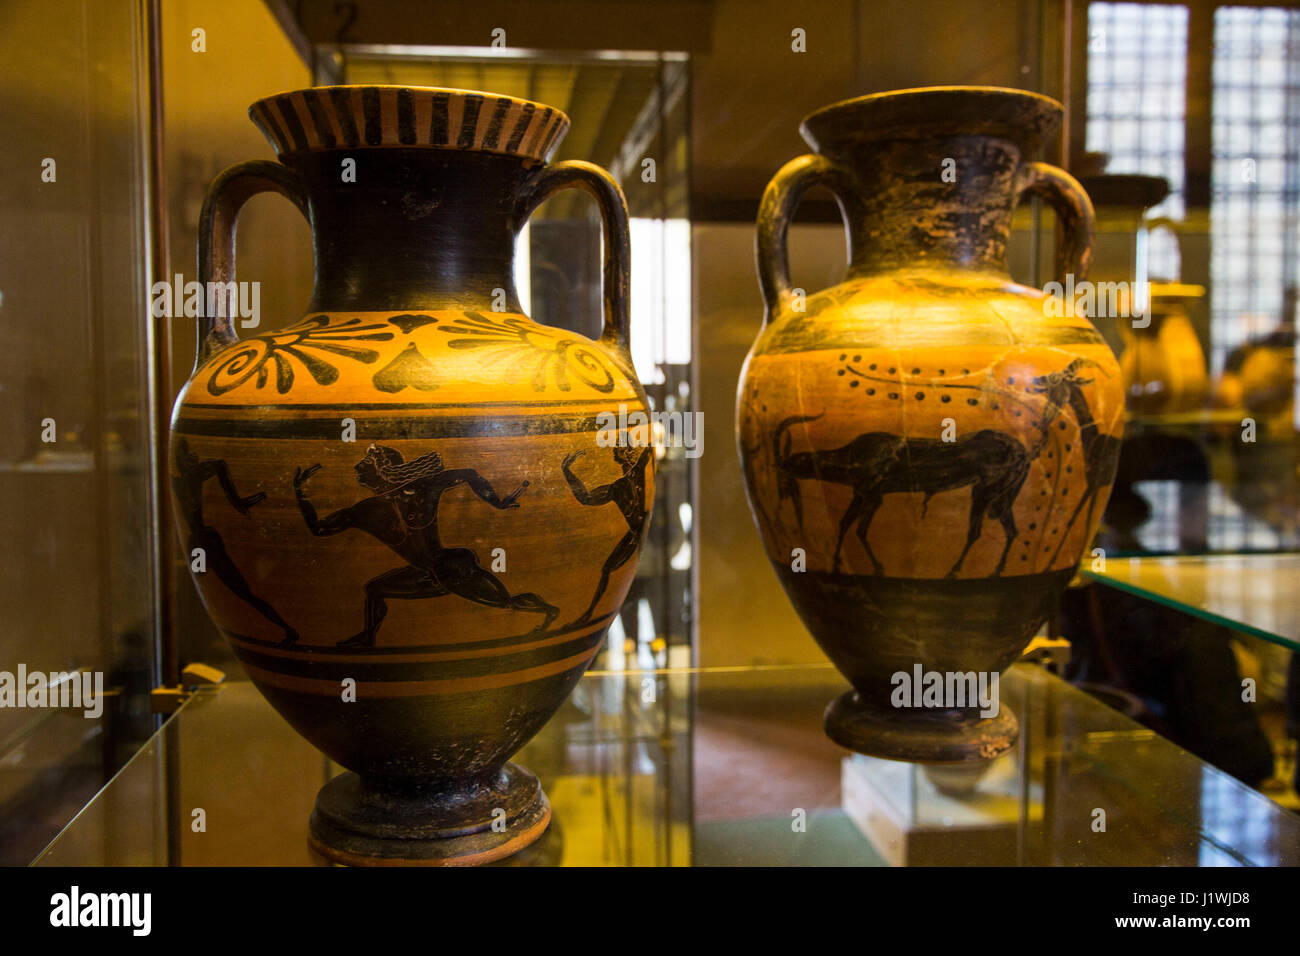 Black-figure pottery was one of the styles of vases produced from the  7th to 5th centuries and found in Etruscan tombs around Tarquinia. Stock Photo